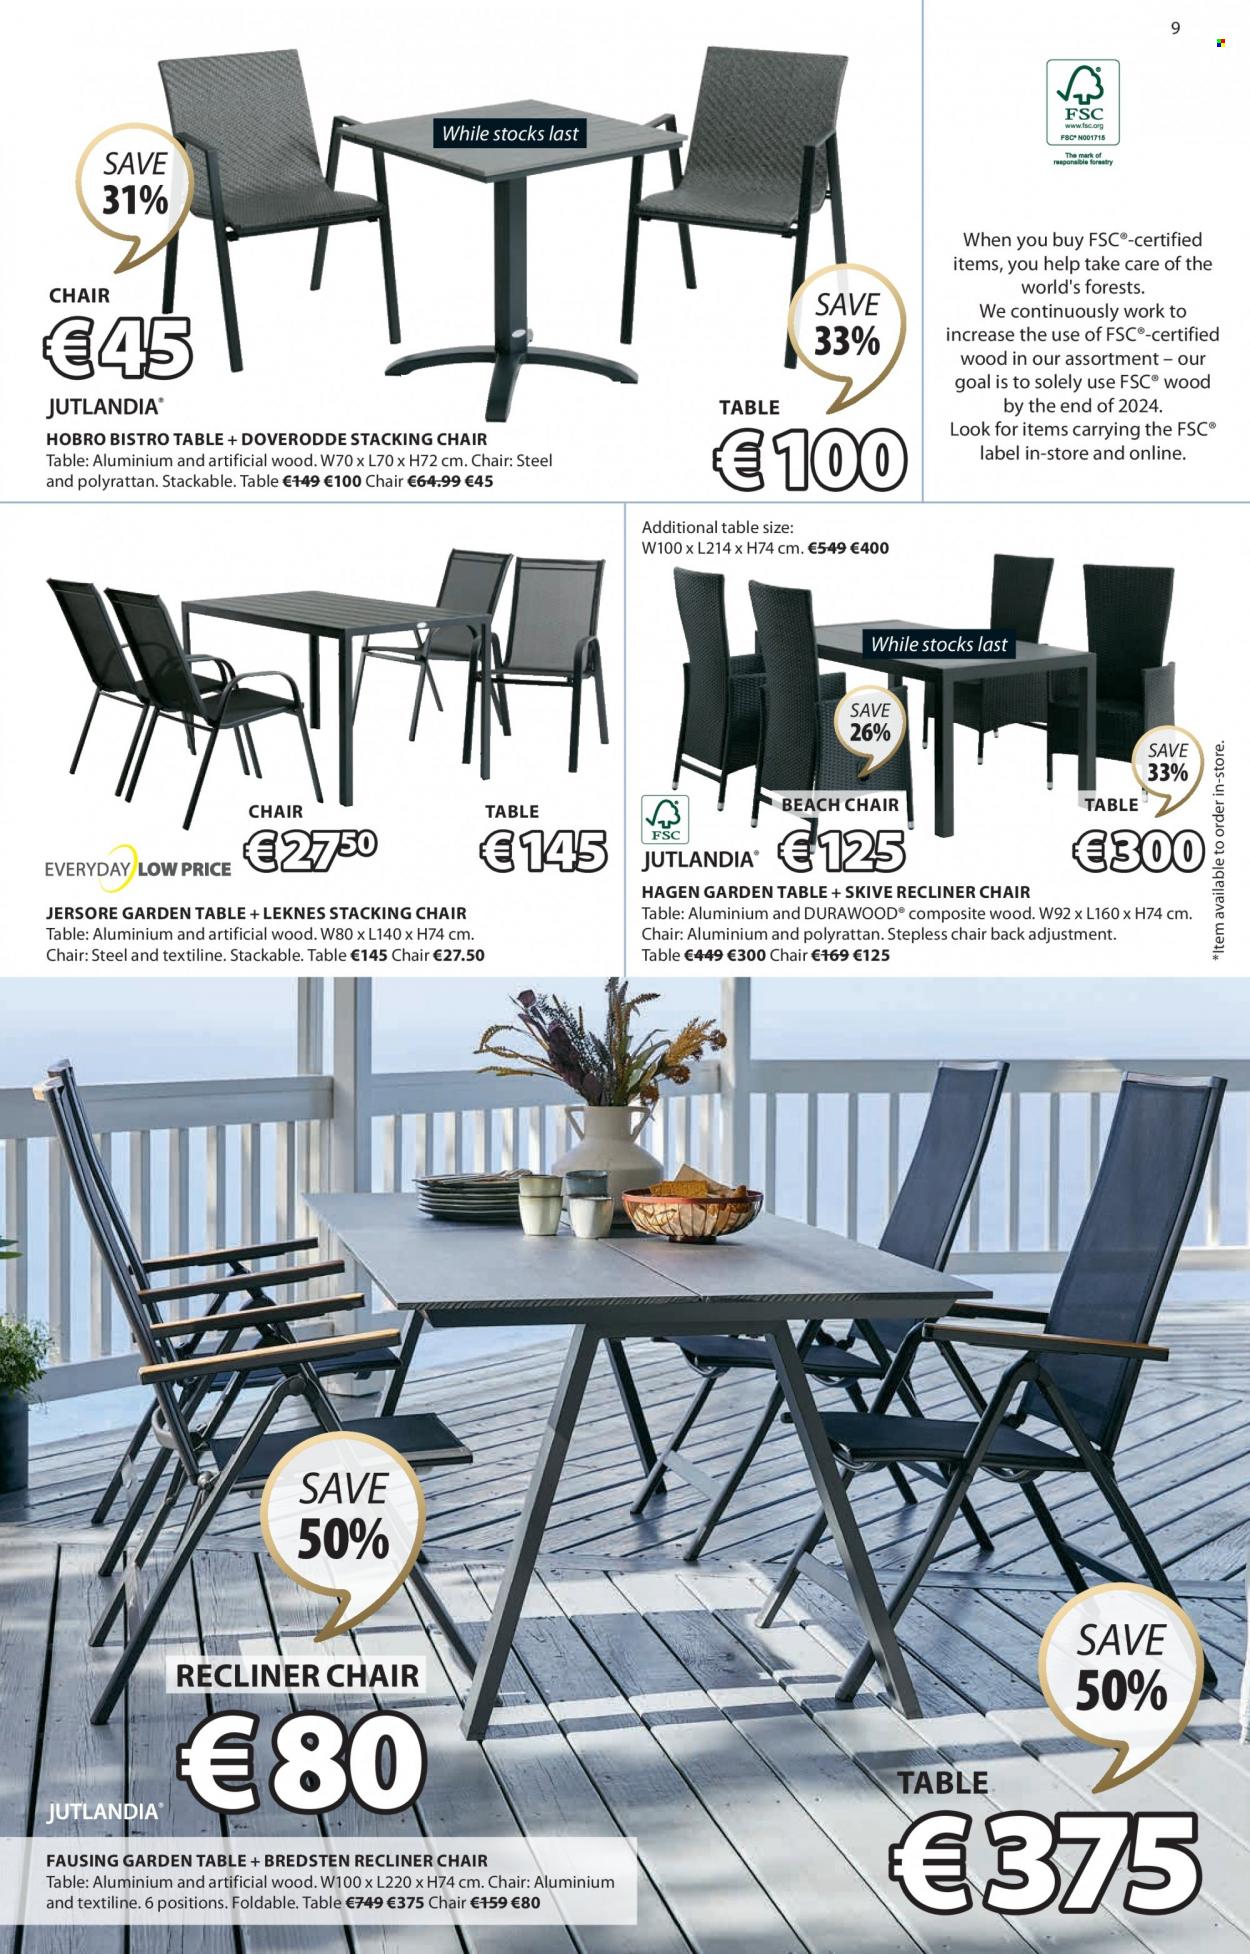 thumbnail - JYSK offer  - Sales products - table, chair, recliner chair, coctail table, beach chair. Page 9.